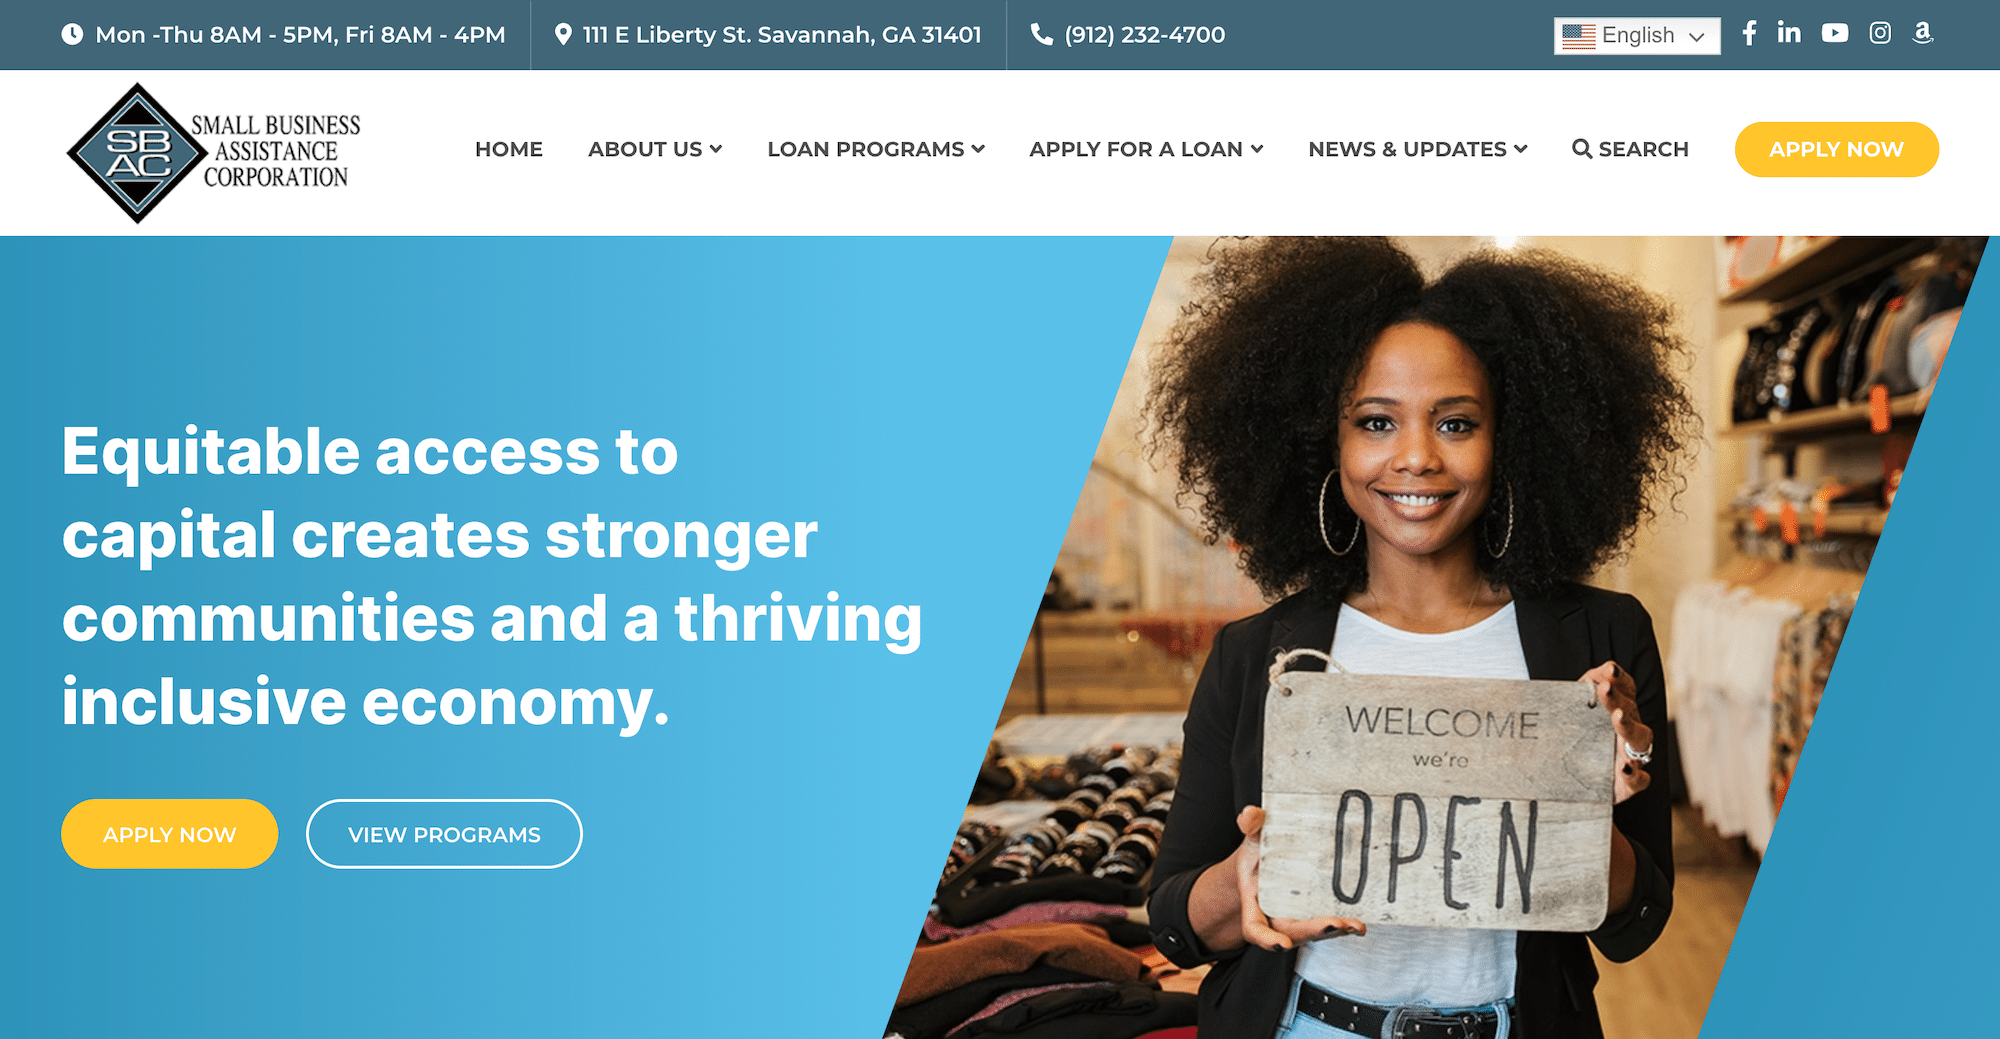 Small Business Assistance Corporation New Website